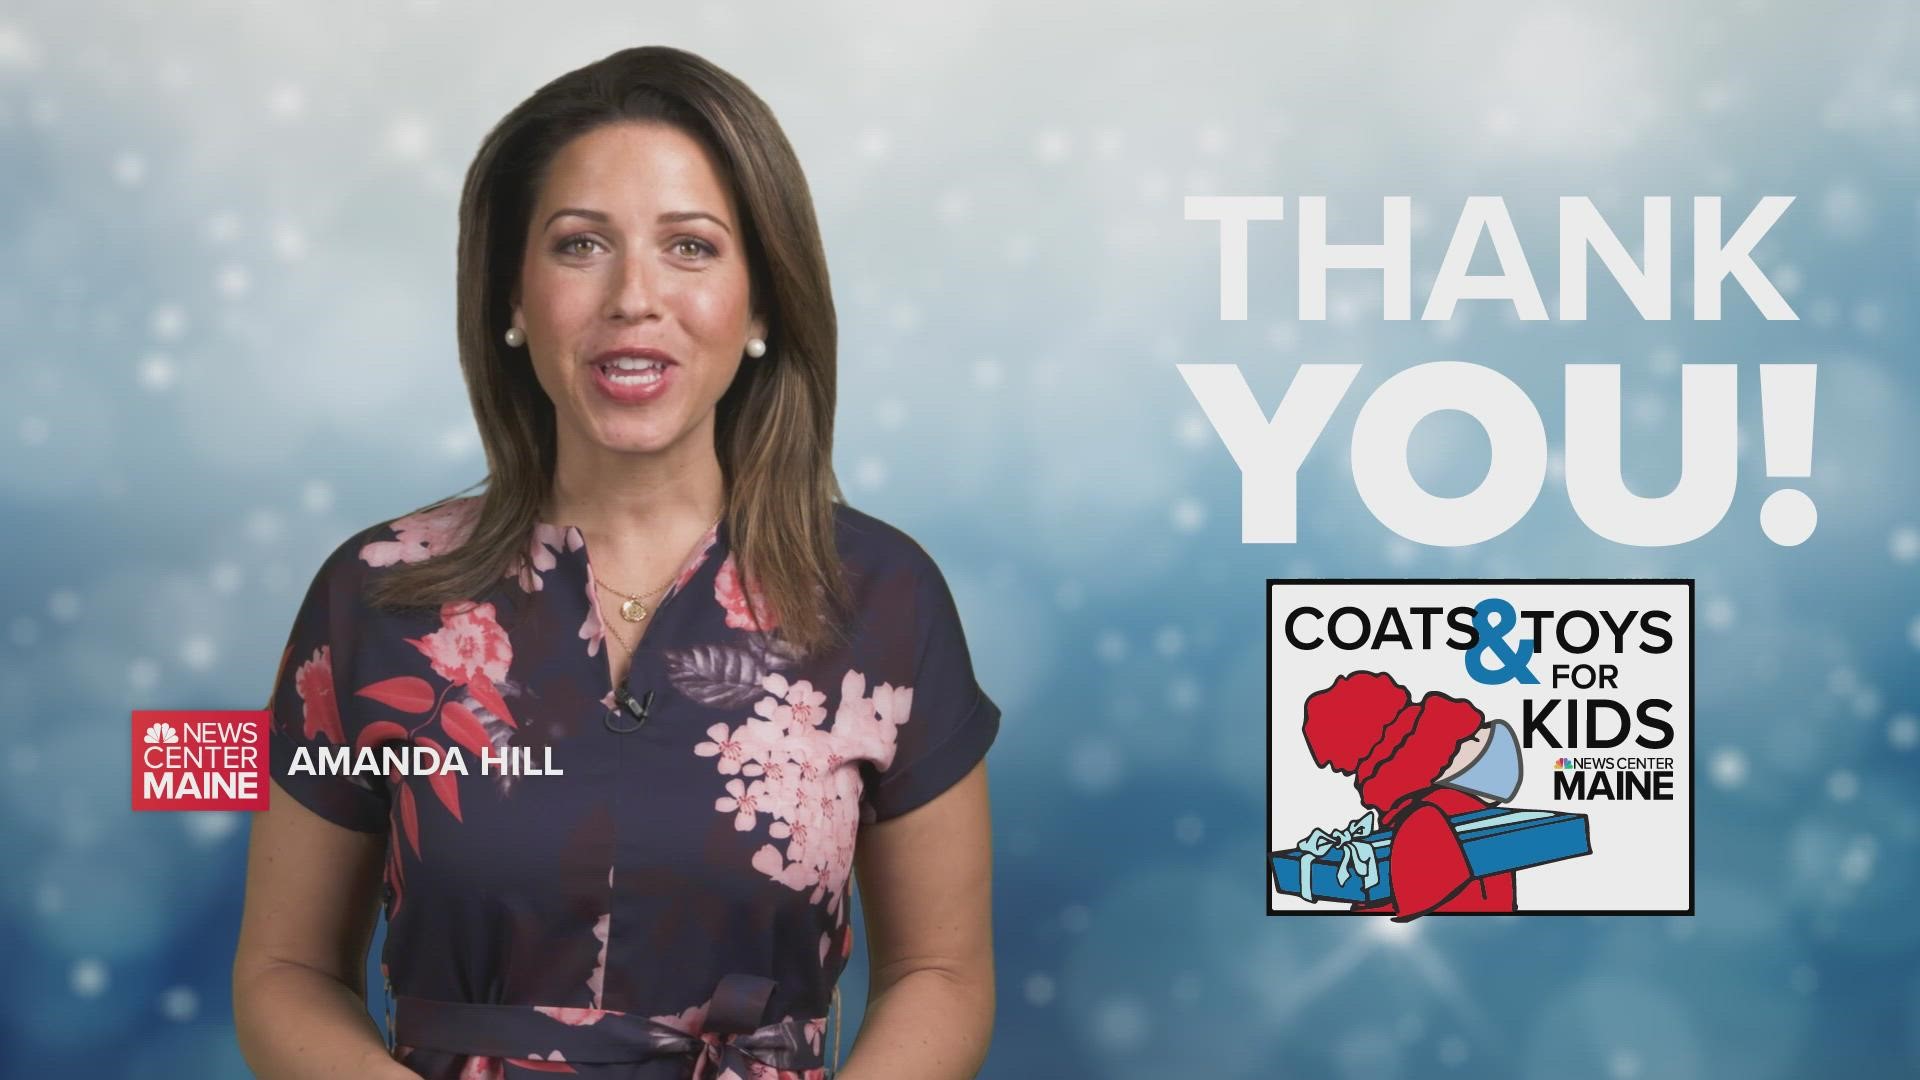 All the toys and winter clothing have been delivered to those in need throughout Maine. Thank you for your donation to NCM's 2021 Coats and Toys for Kids Wish List.